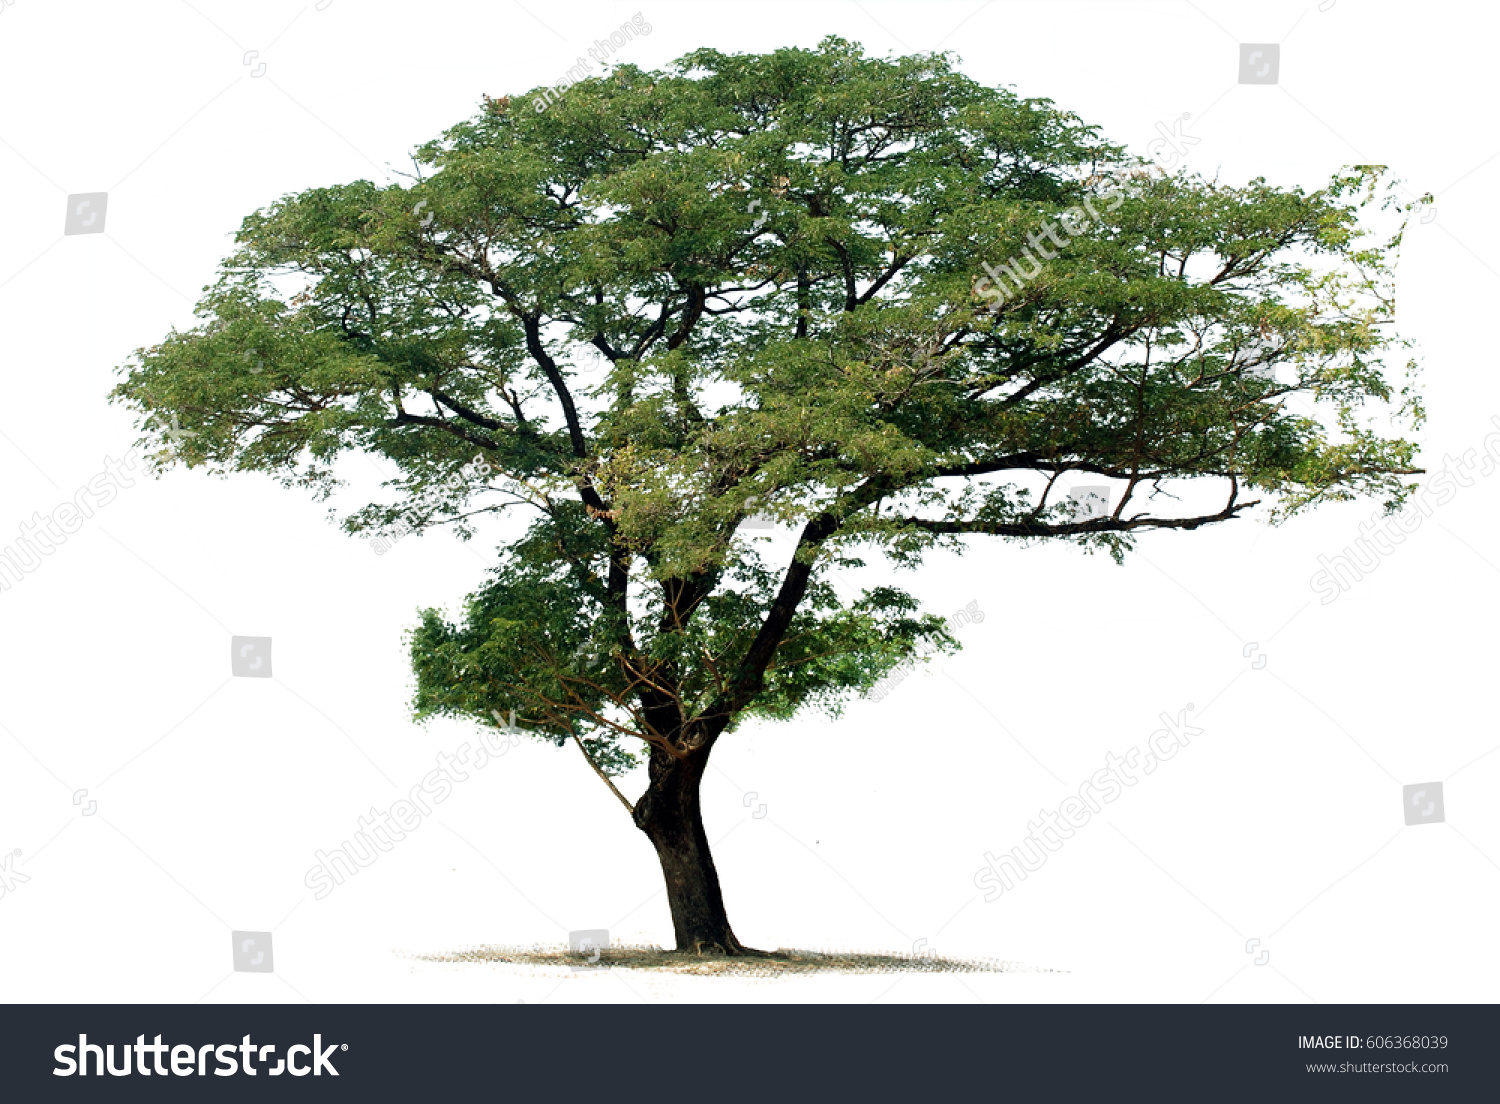 Tree isolated on a white background #606368039